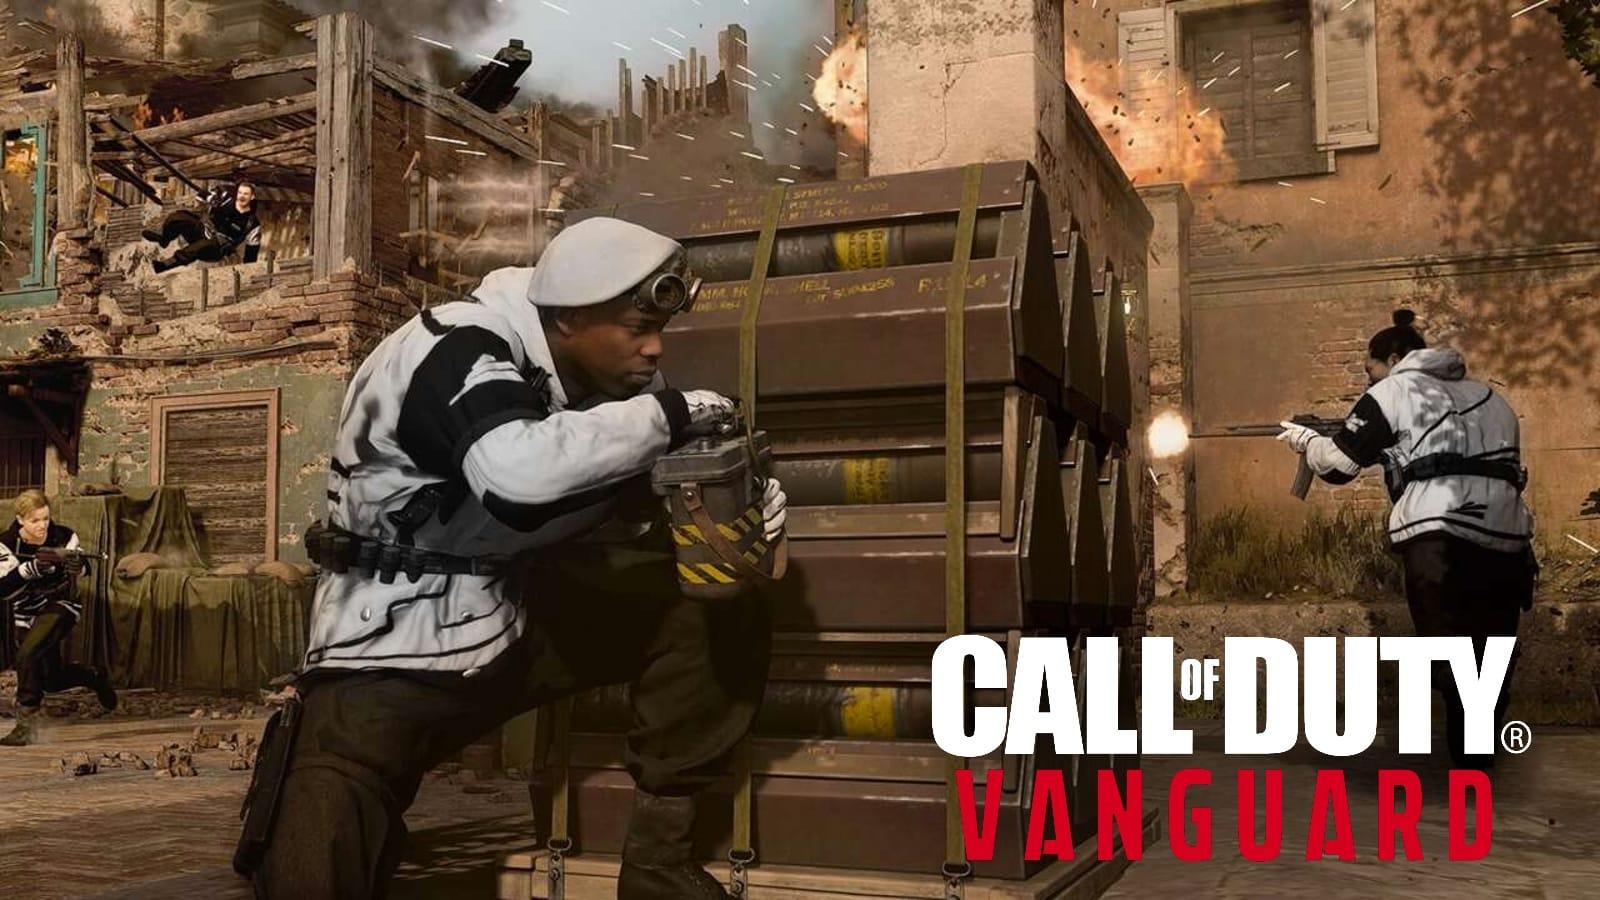 COD Vanguard Update 1.20 Shoots Out for Mid-Season Patch This July 26